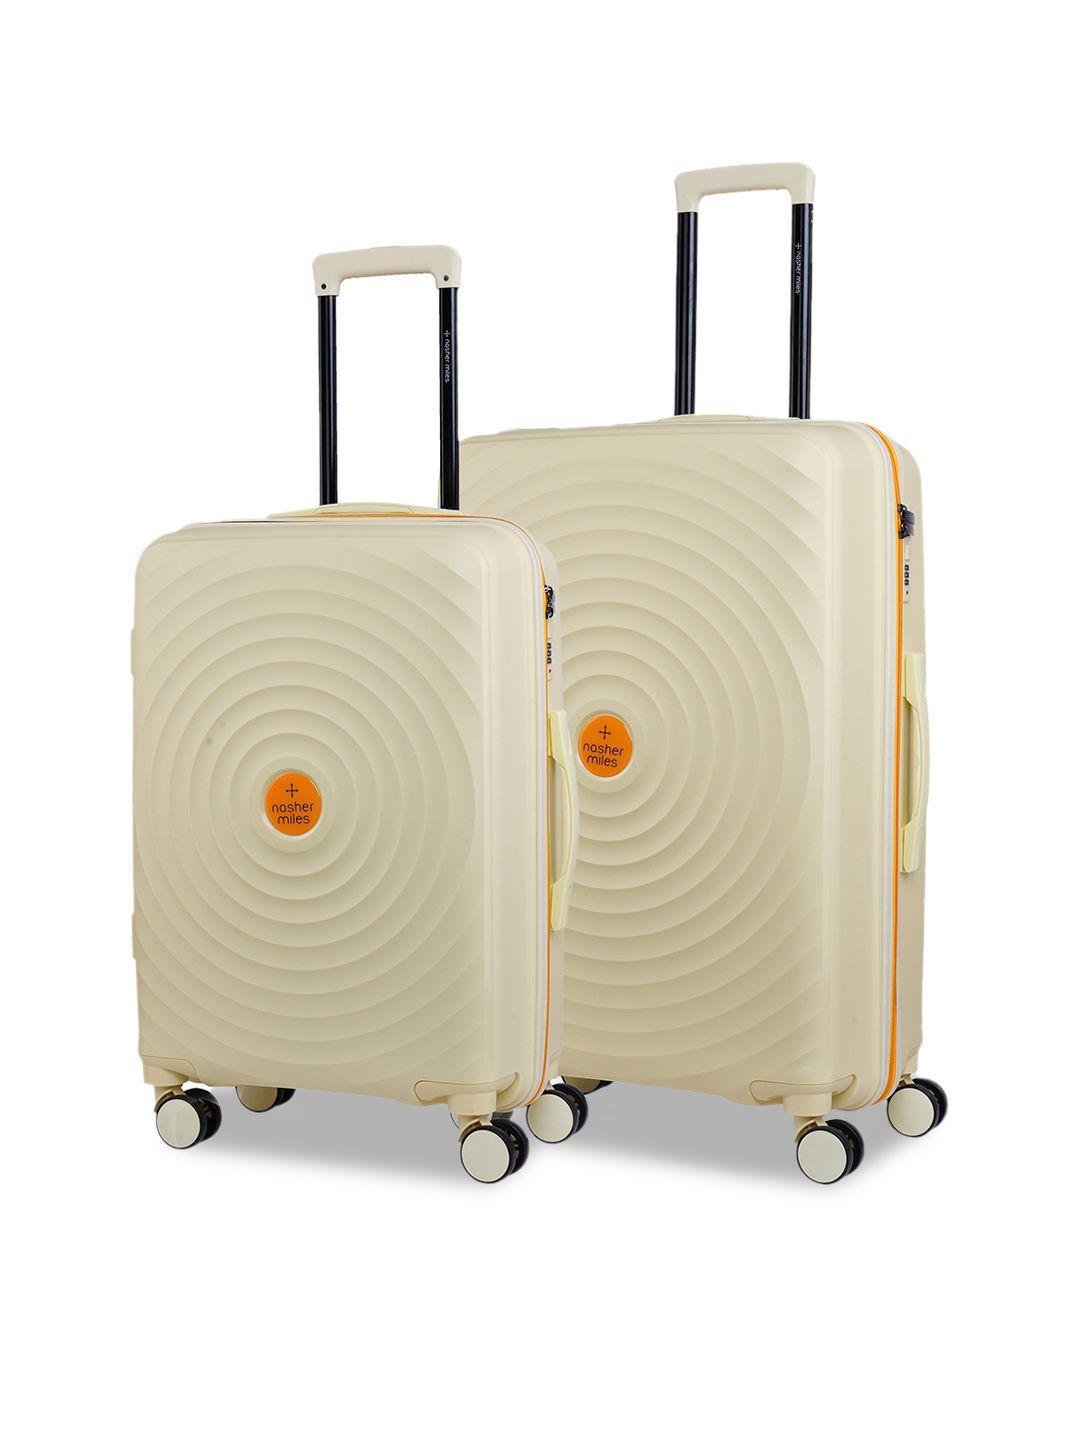 nasher miles set of 2 cream-colored textured hard-sided trolley bags